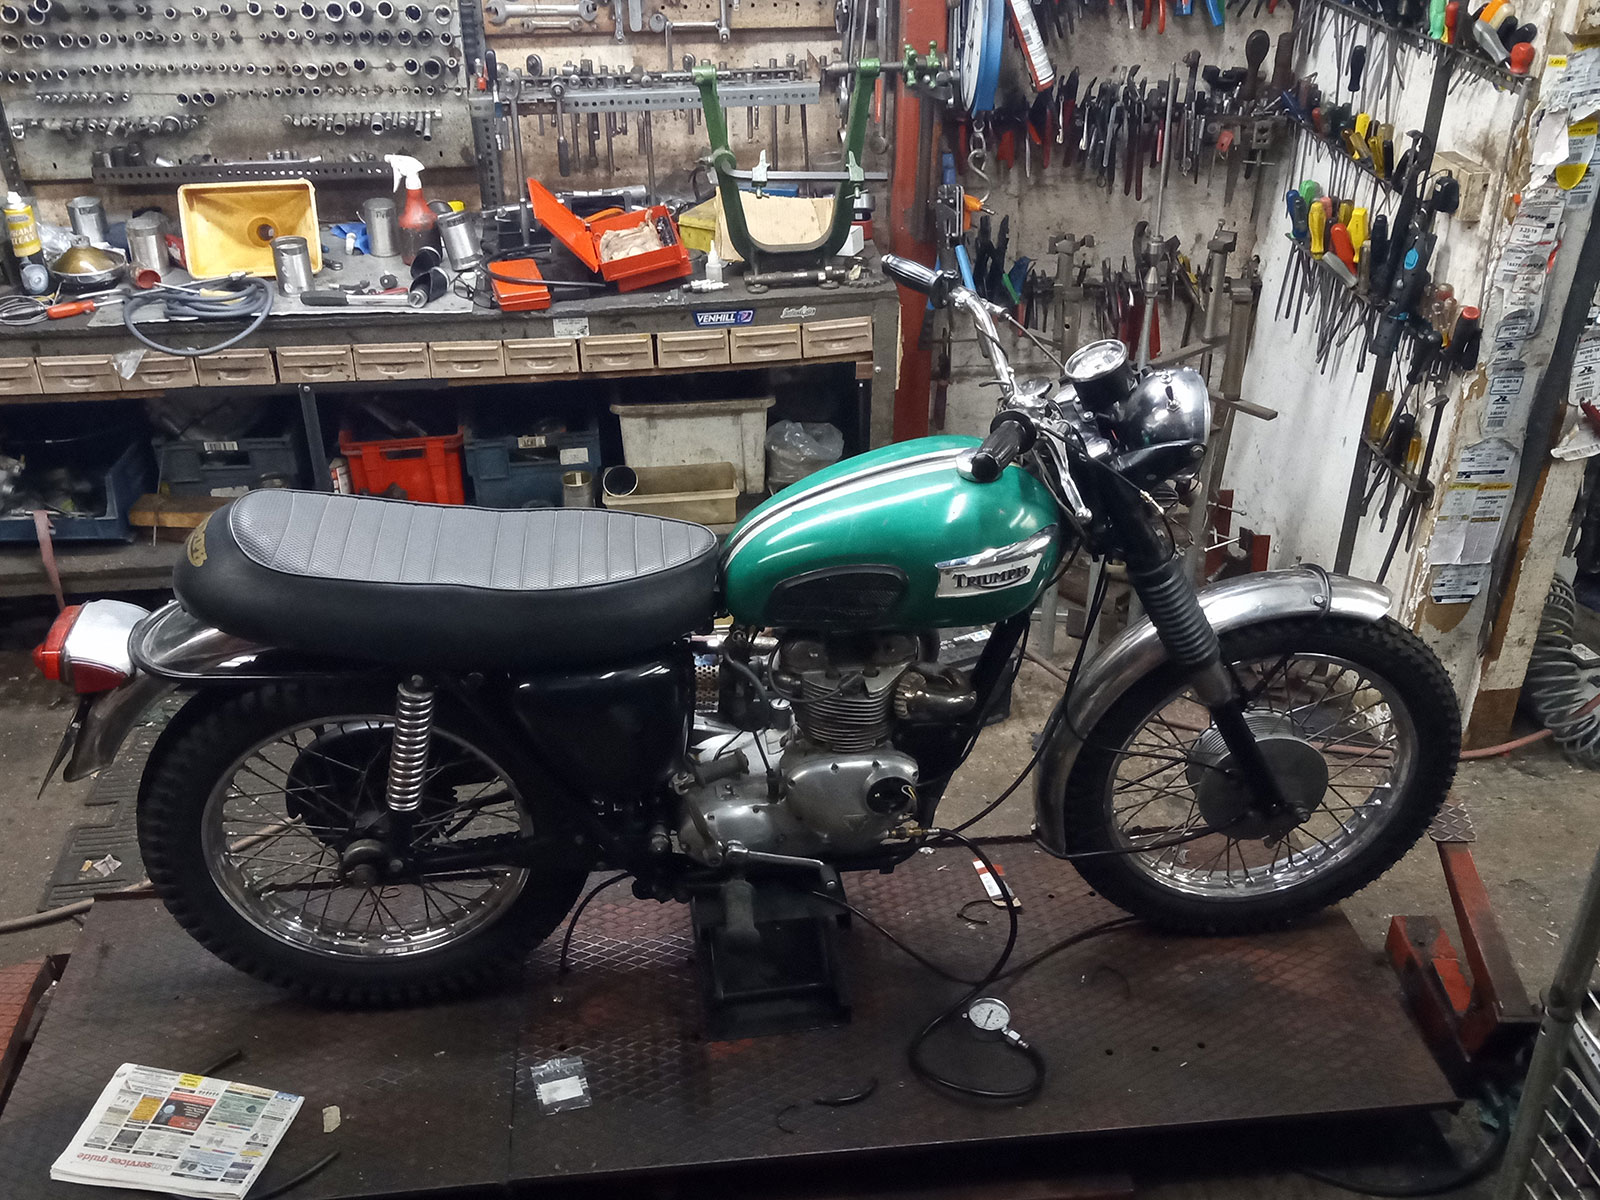 Triumph 500 gets fixed